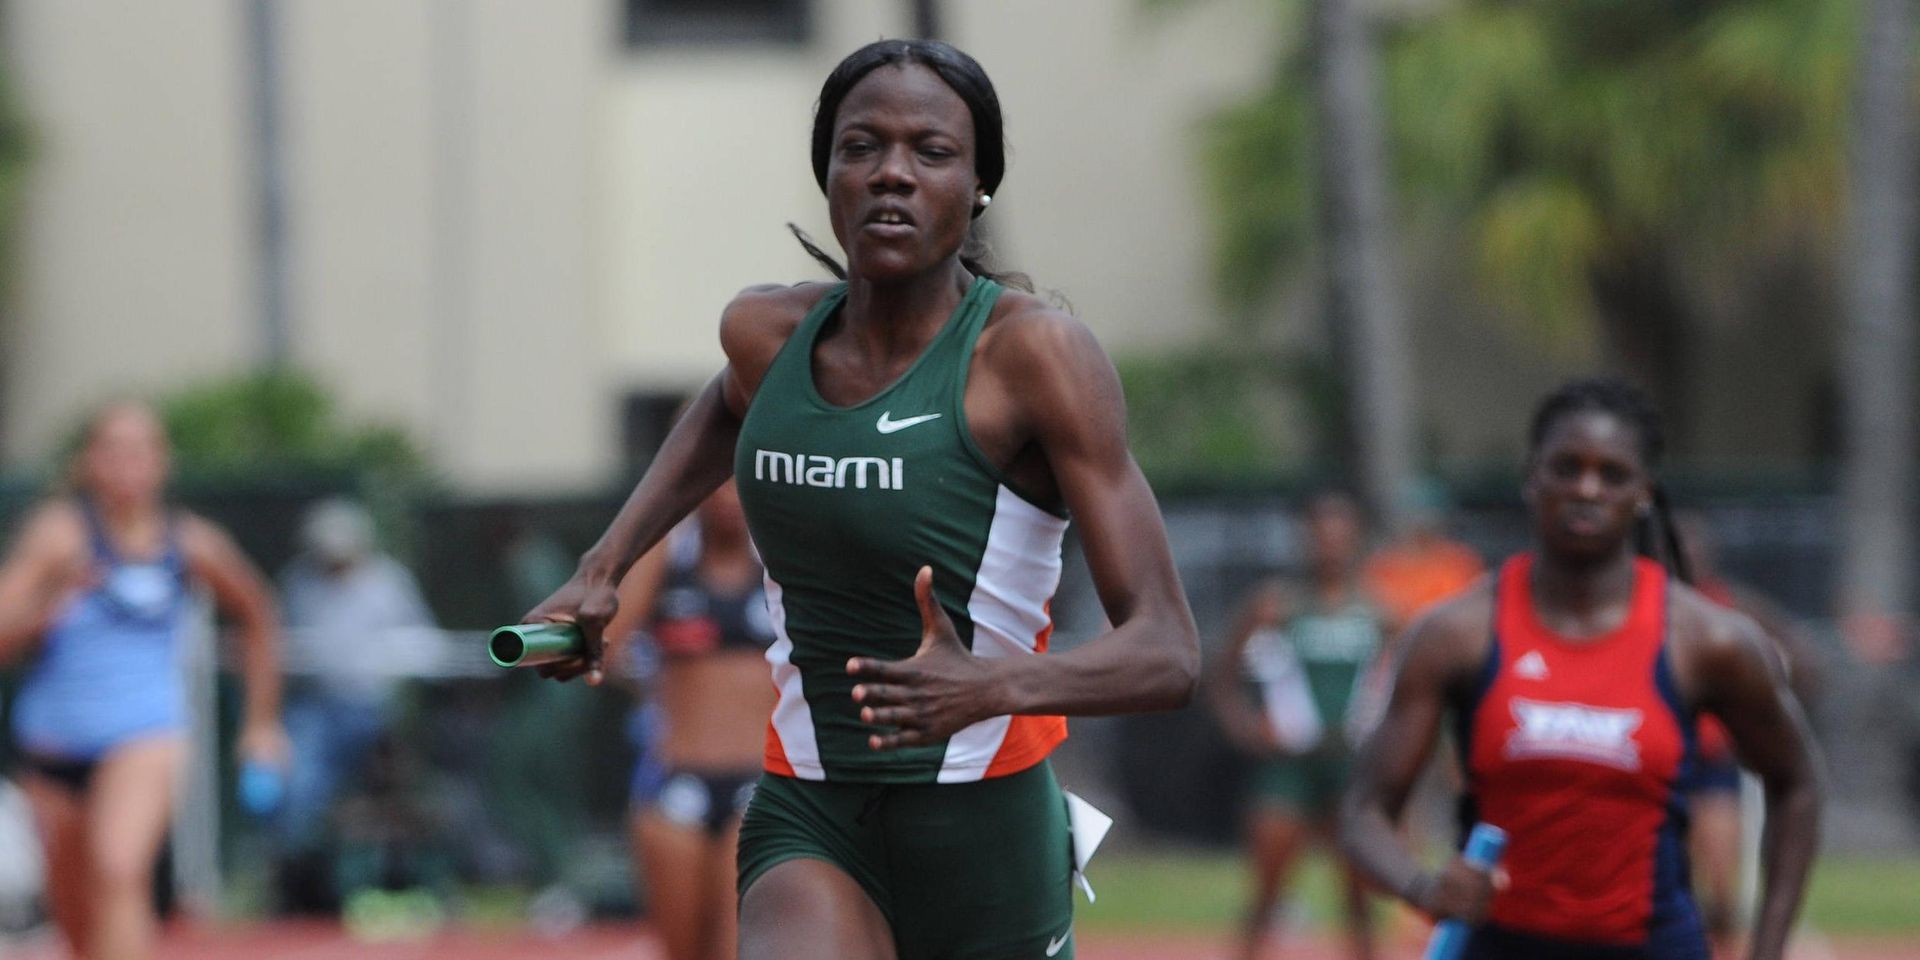 @MiamiTrack Finishes Strong at Florida Relays